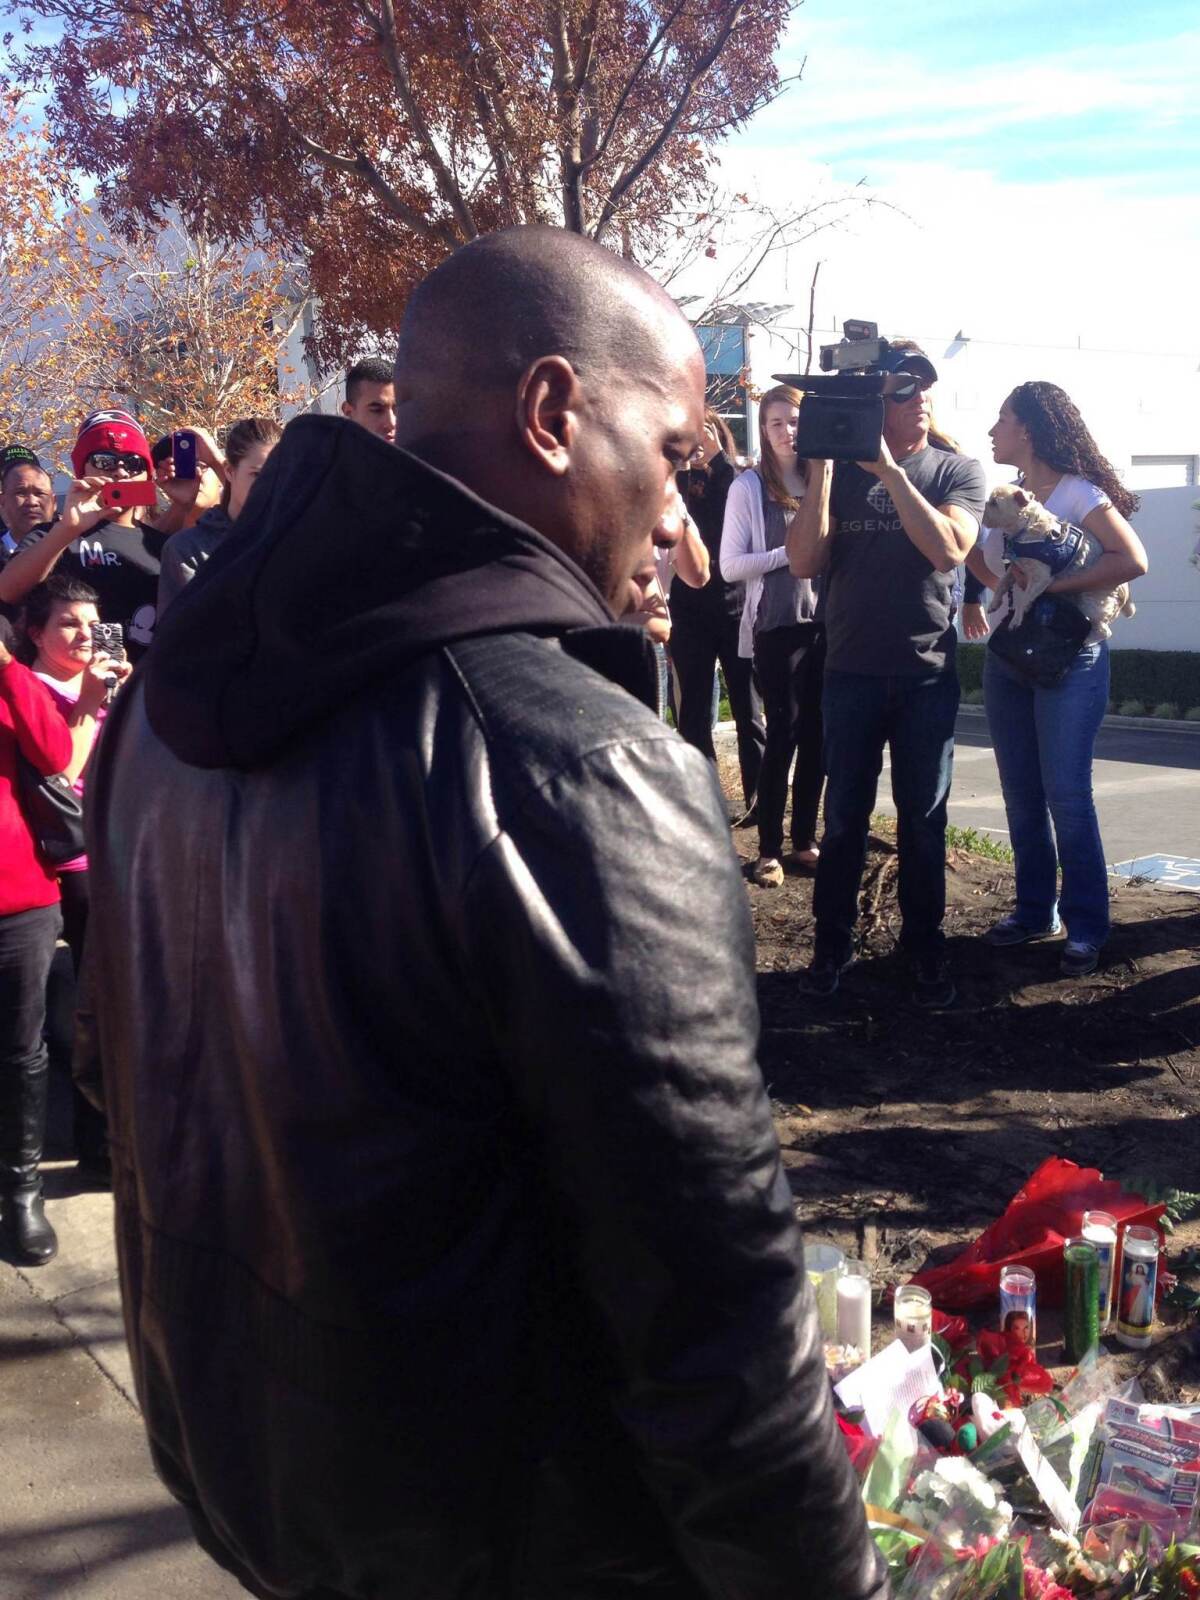 Actor Tyrese Gibson, Paul Walker's co-star on the "Fast and the Furious" films, pays his respects at the makeshift memorial site at the scene of the crash.